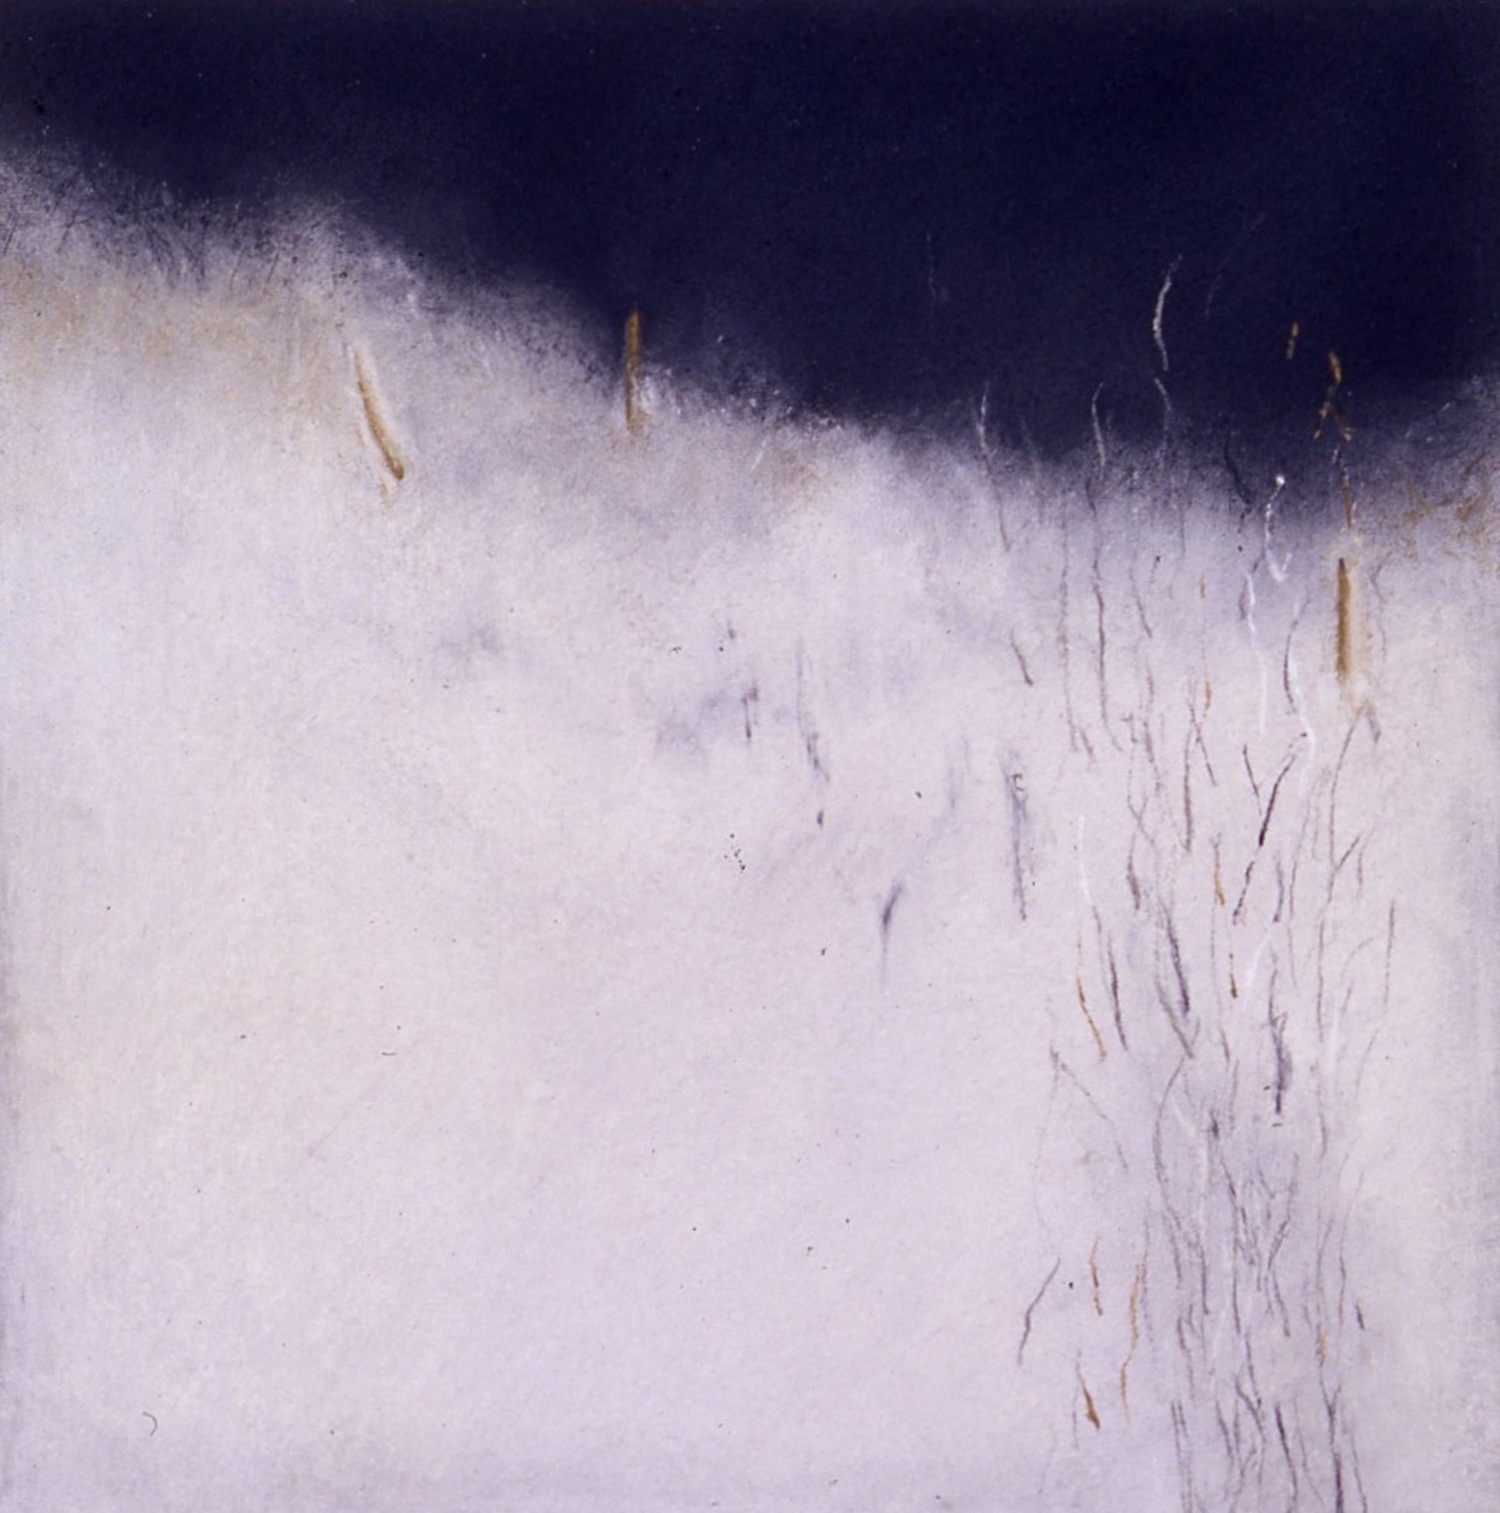 Jessica Masters, "Early work two," 1996, Pastel on BFK Rives, 10x10in. Sold. Painted with my first set of Yarka pastels.